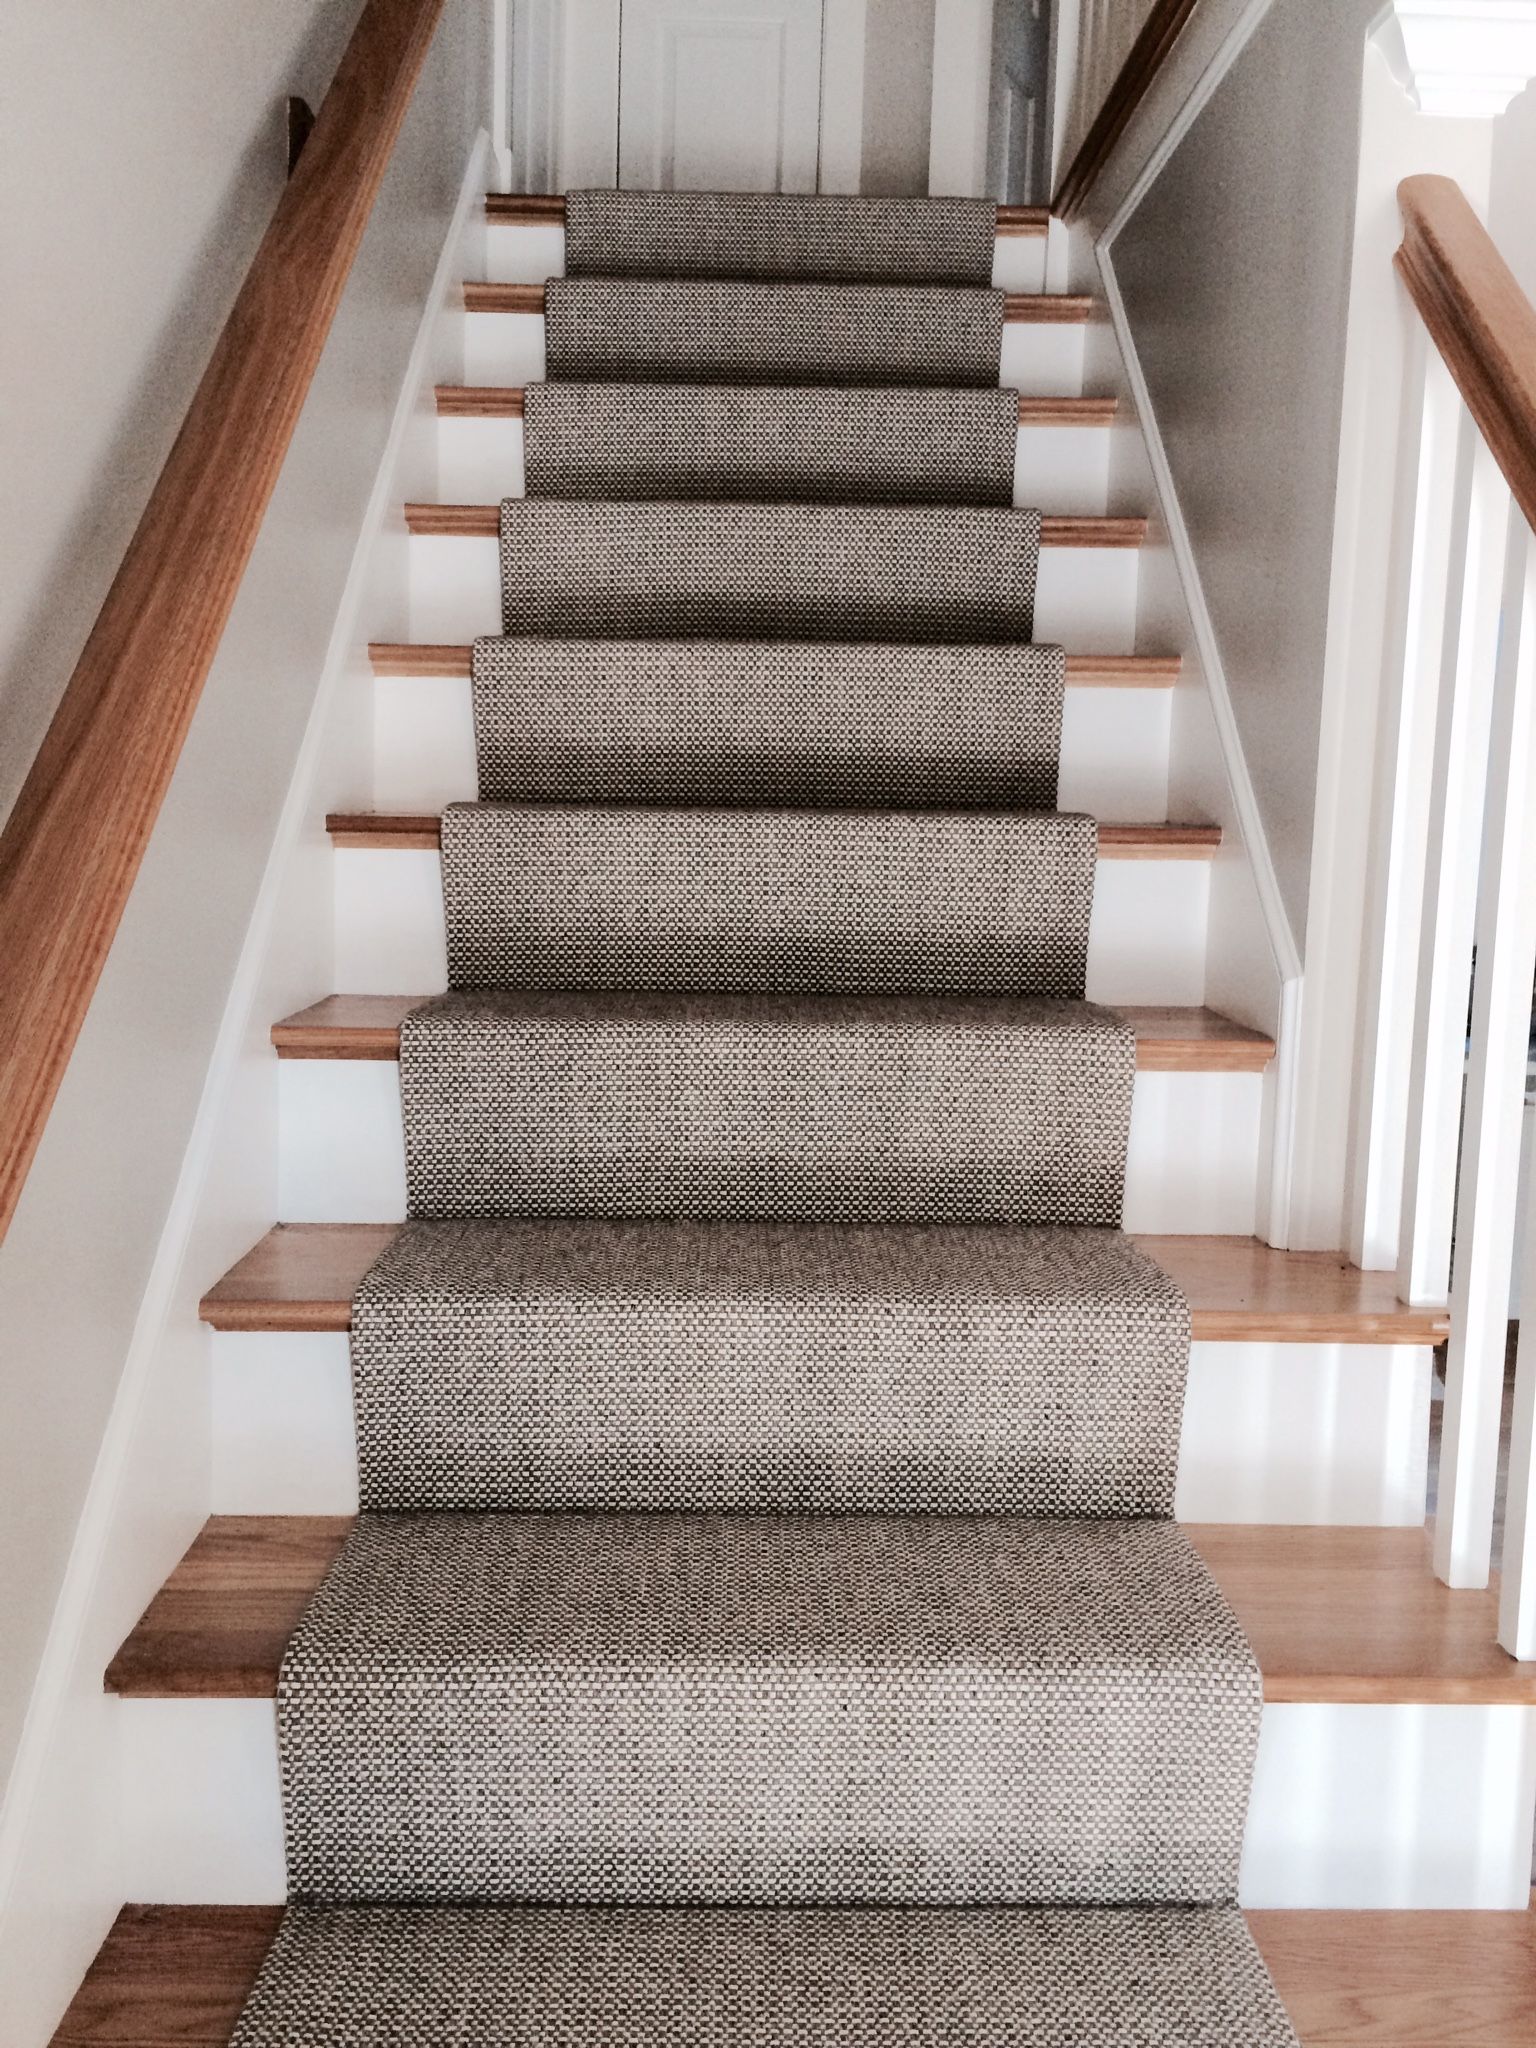 stair runners woven wool stair runner that we fabricated using a fold and stitch method BYMCPDF